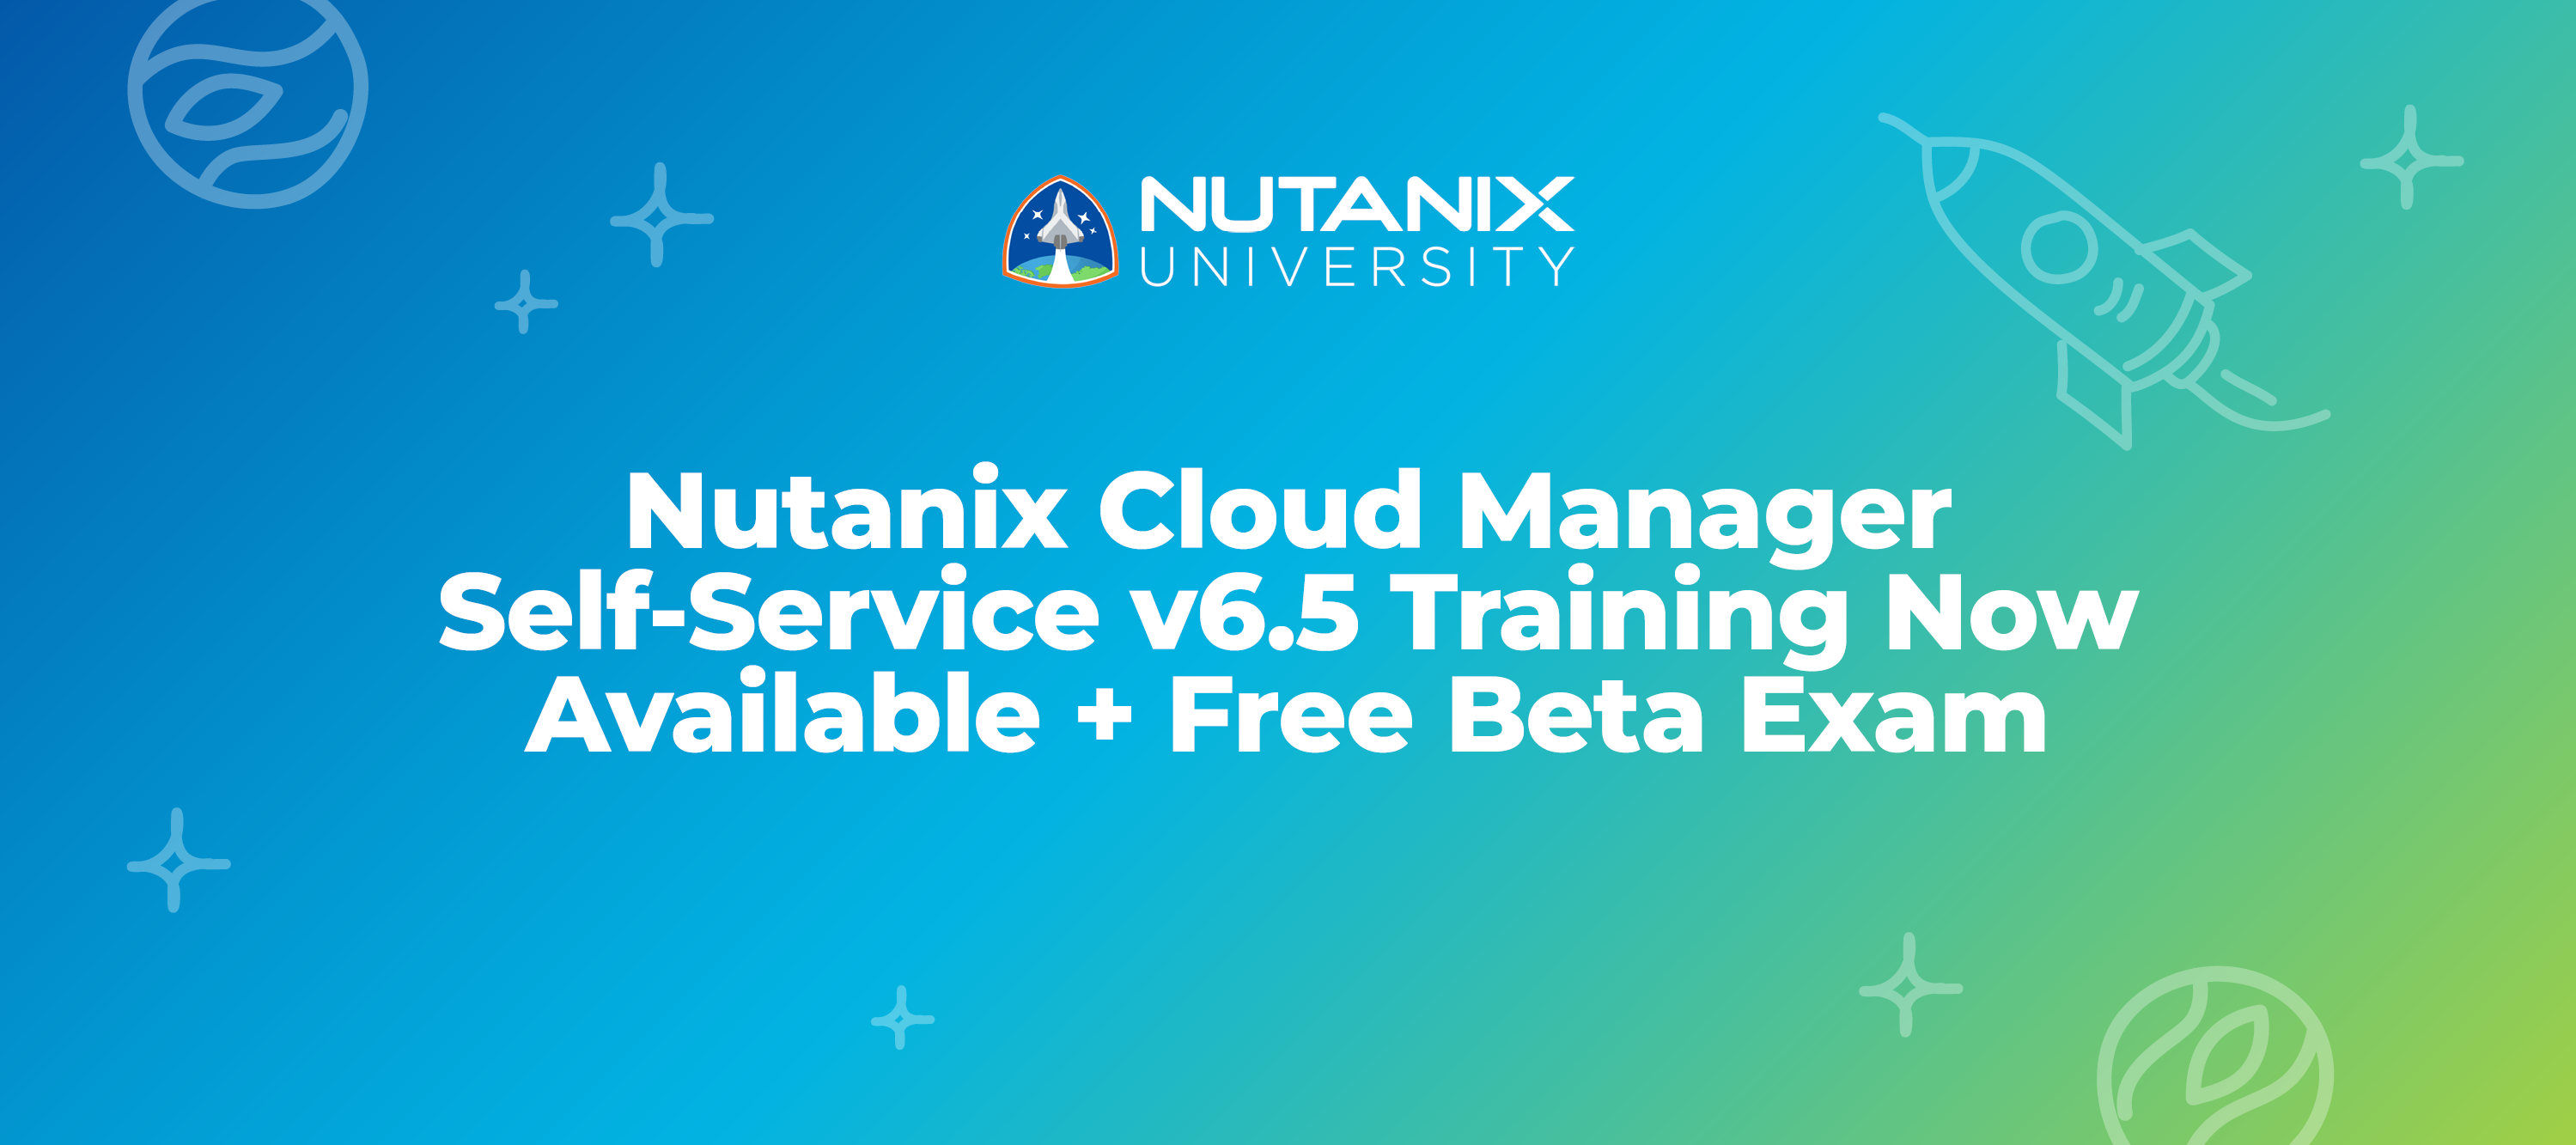 Nutanix Cloud Manager Self-Service v6.5 Training Now Available + Free Beta Exam